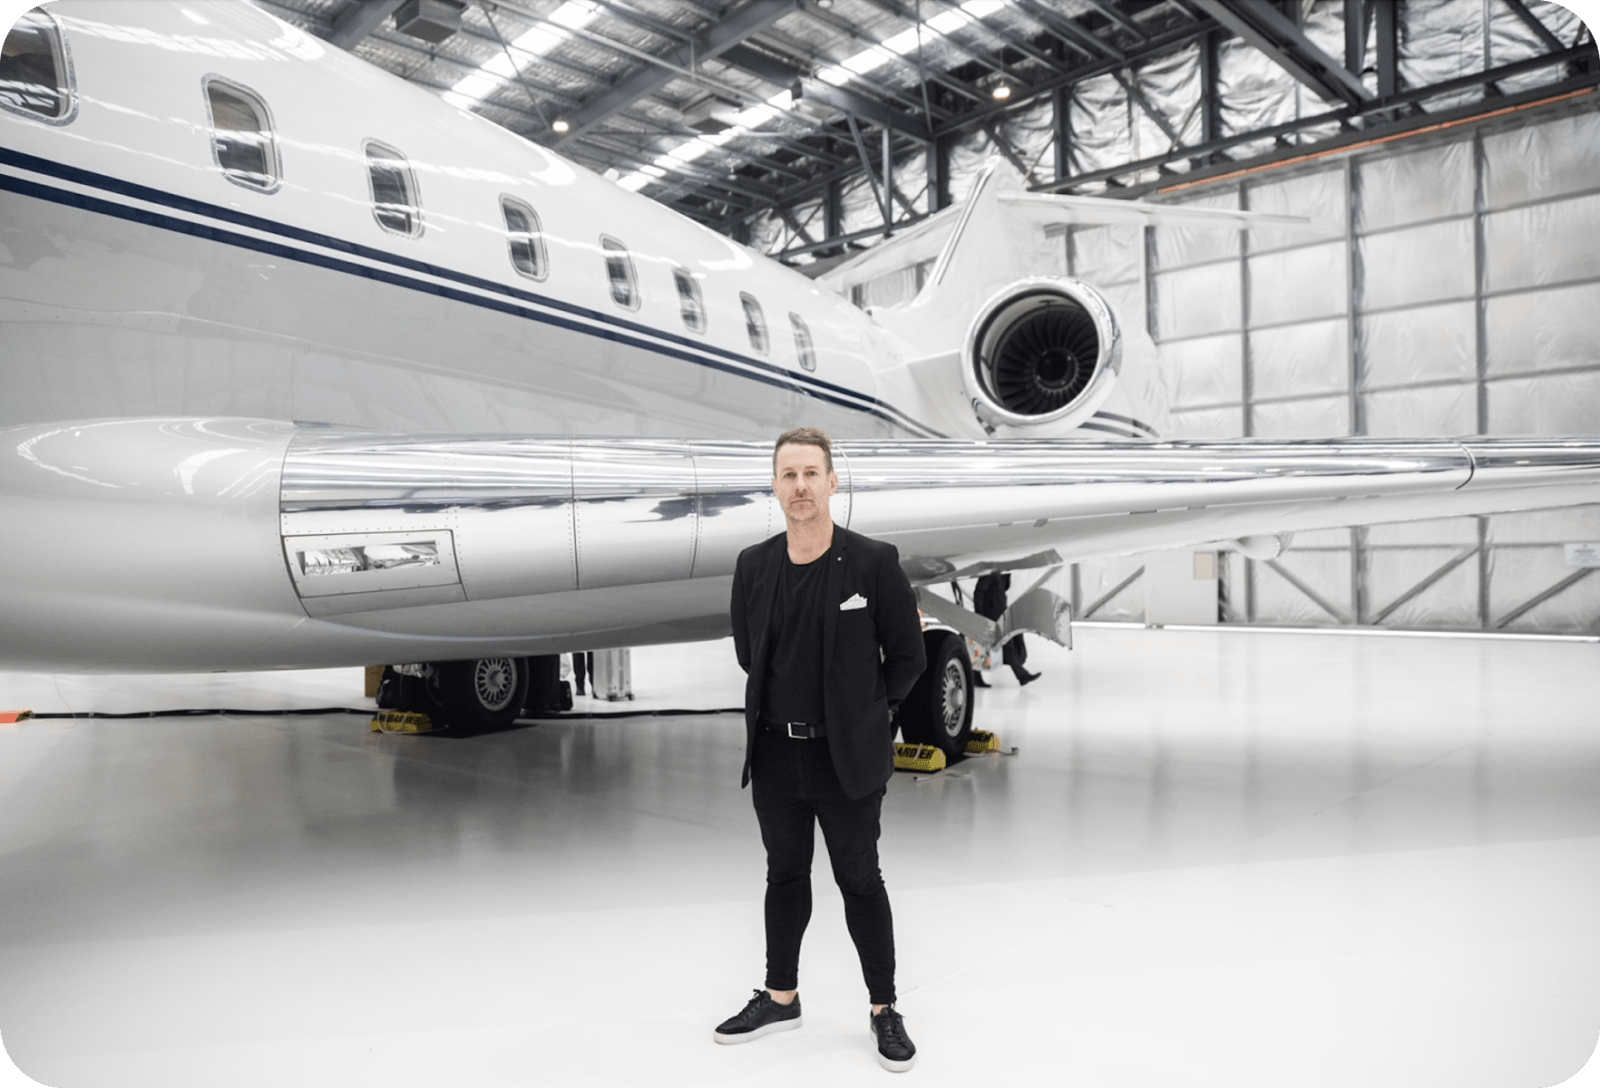 Event planner male standing in front of private jet